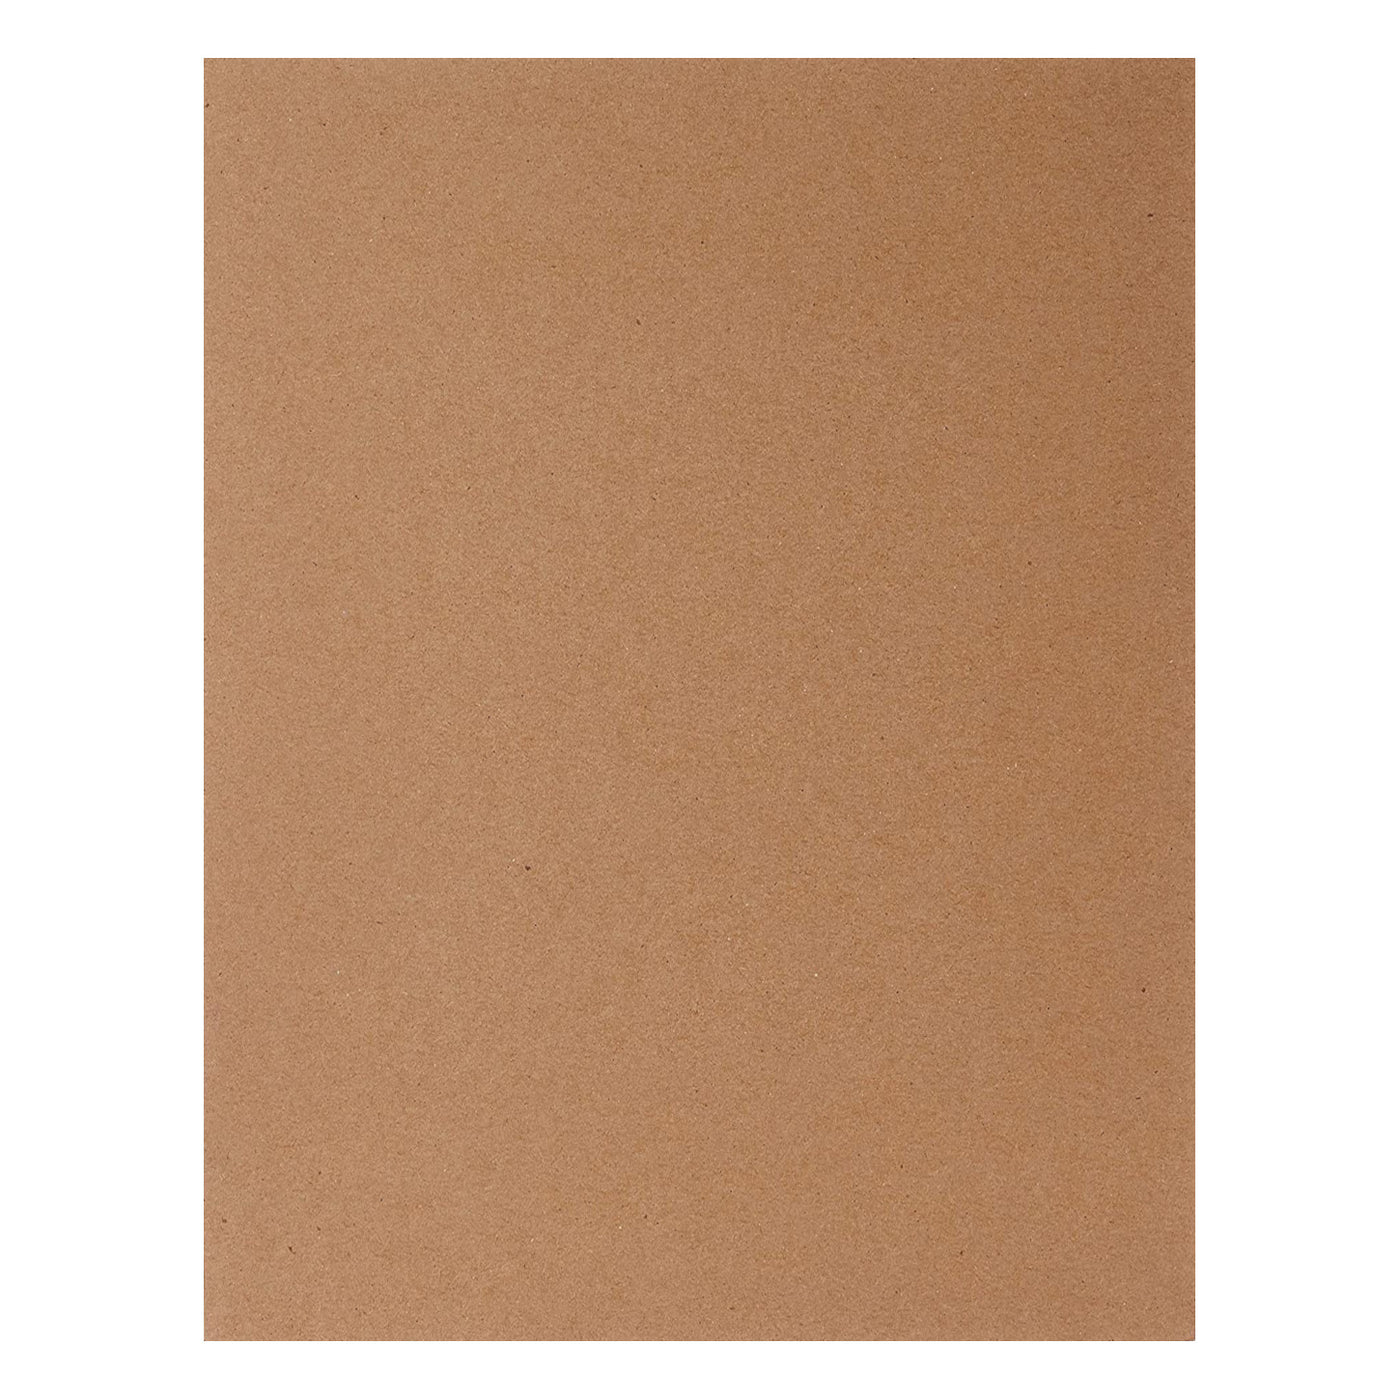  25 Chipboard Sheets 8.5 X 11 Inch - 22pt